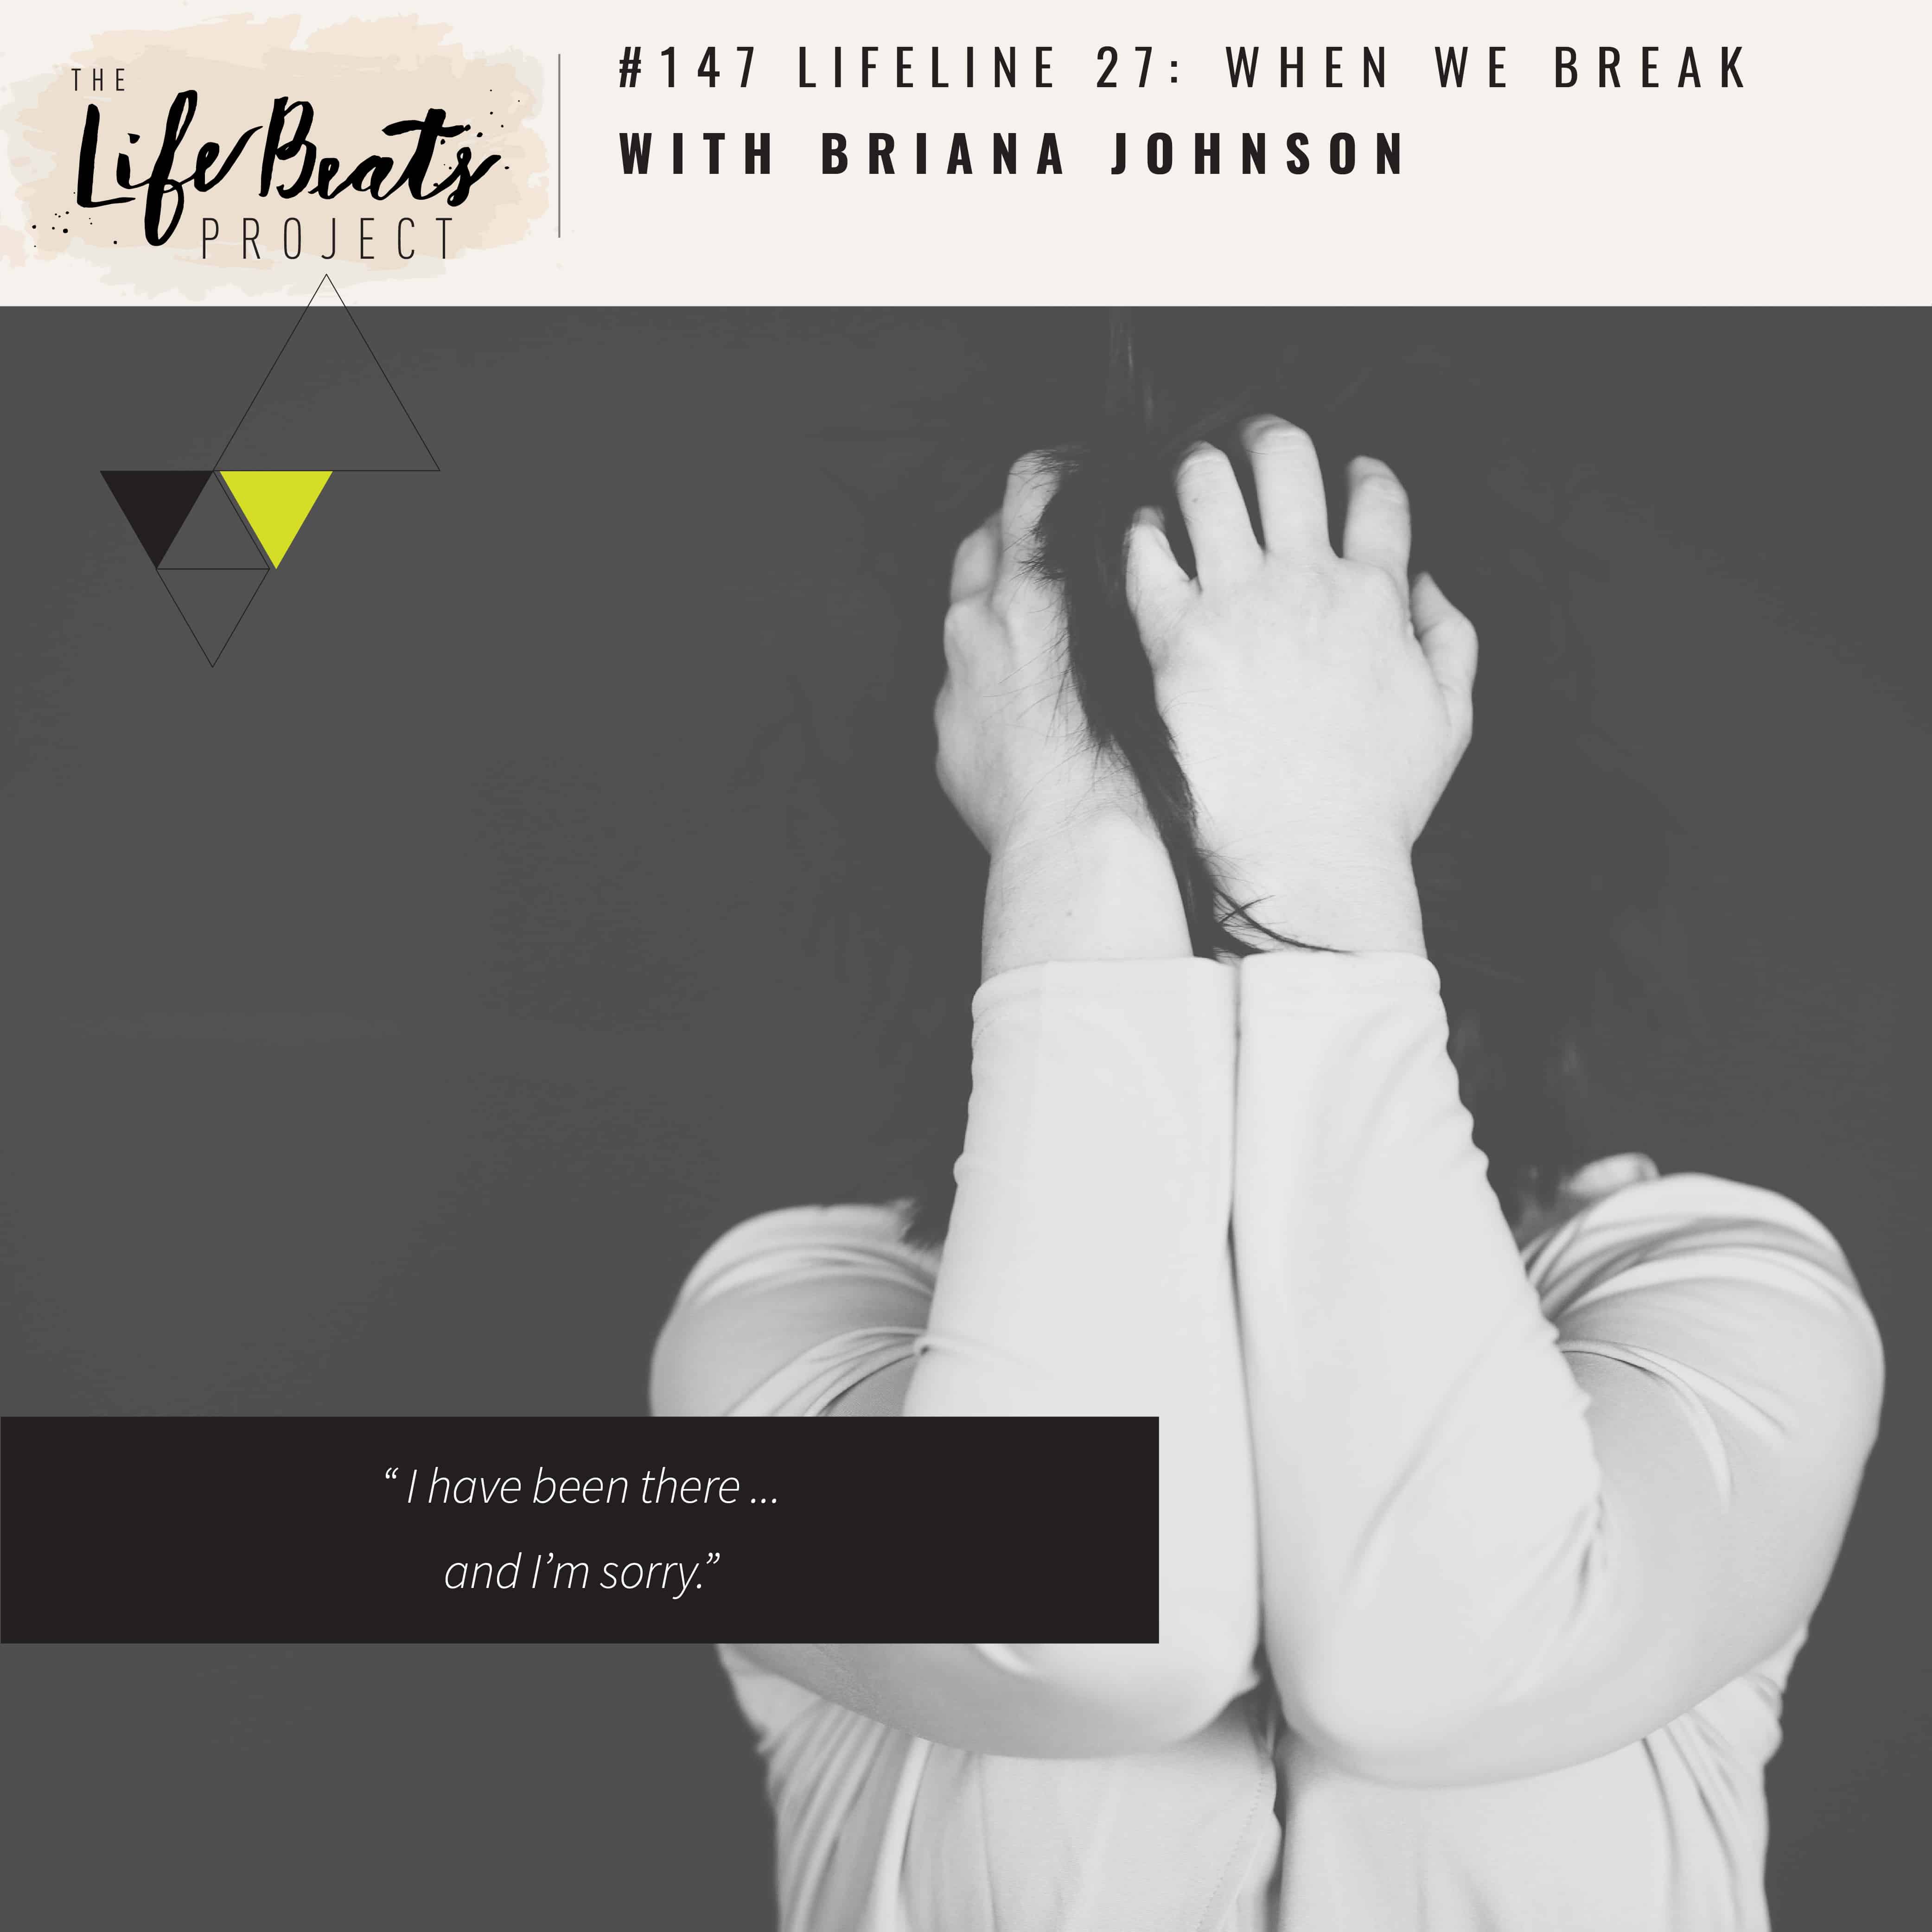 uncertainty rejection alone depression broken breaking point single divorce betrayal podcast The Lifebeats Project Briana Johnson lifeline hope Christ perspective love